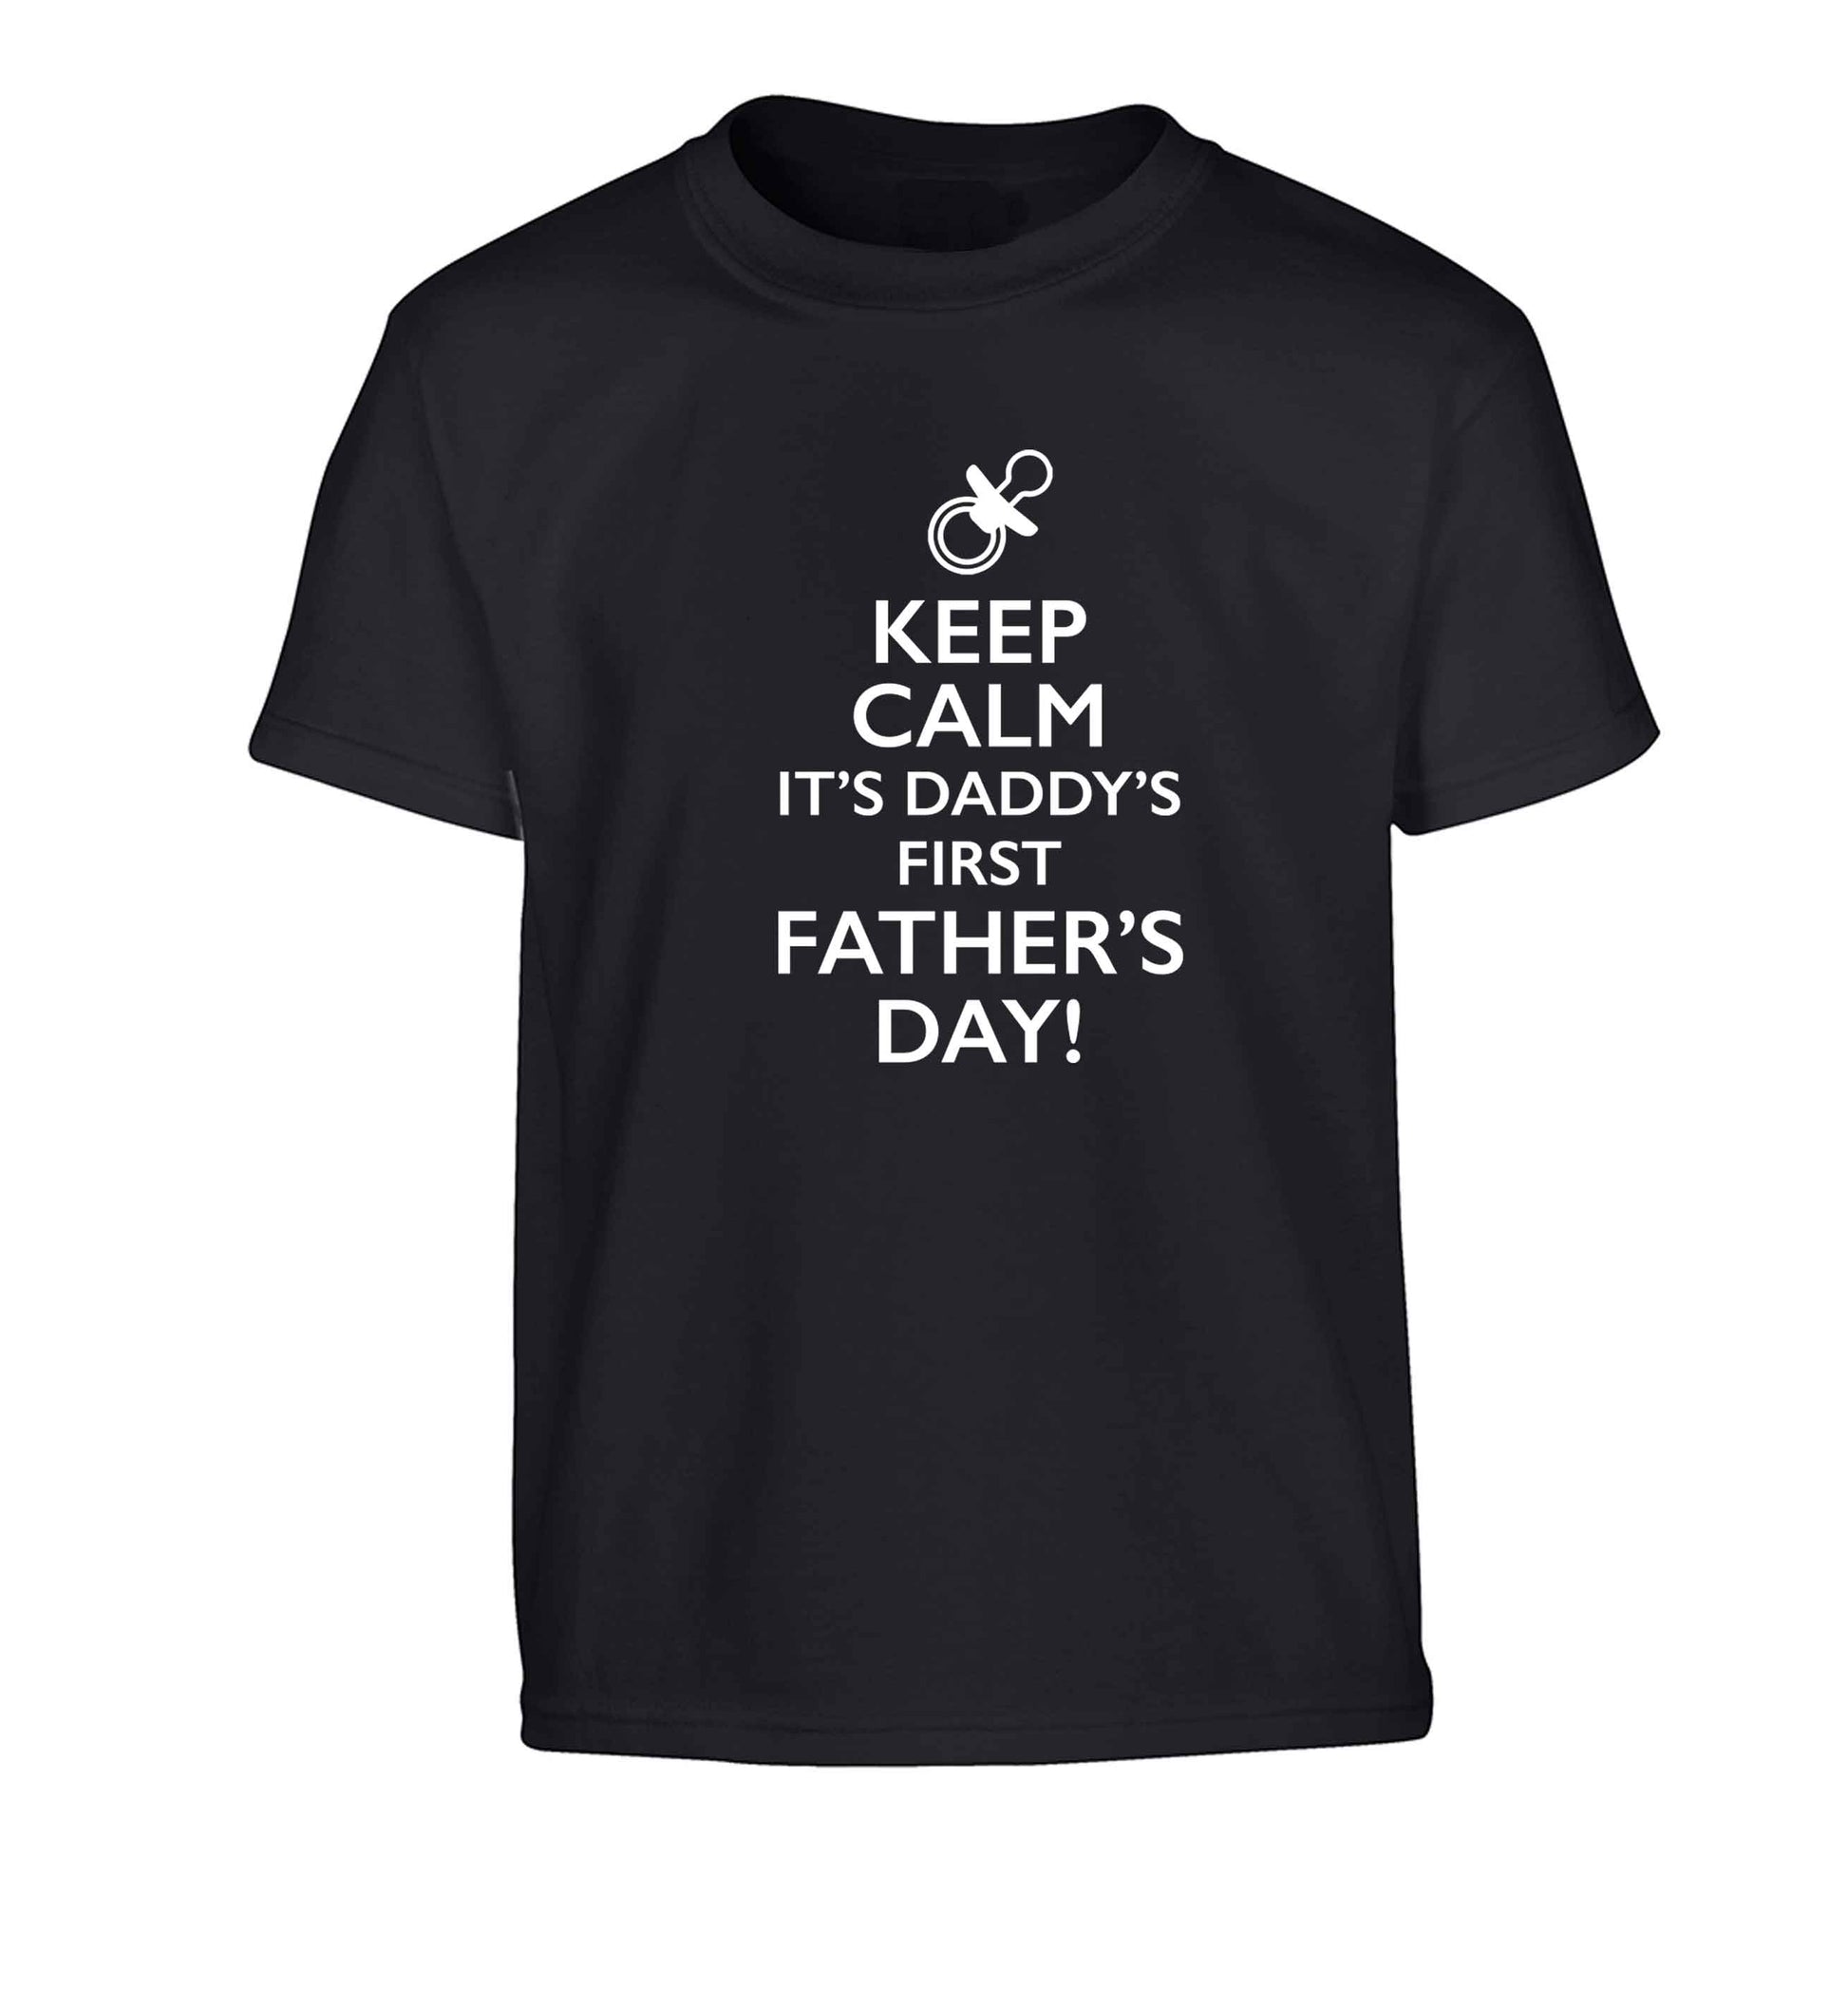 Keep calm it's daddys first father's day Children's black Tshirt 12-13 Years